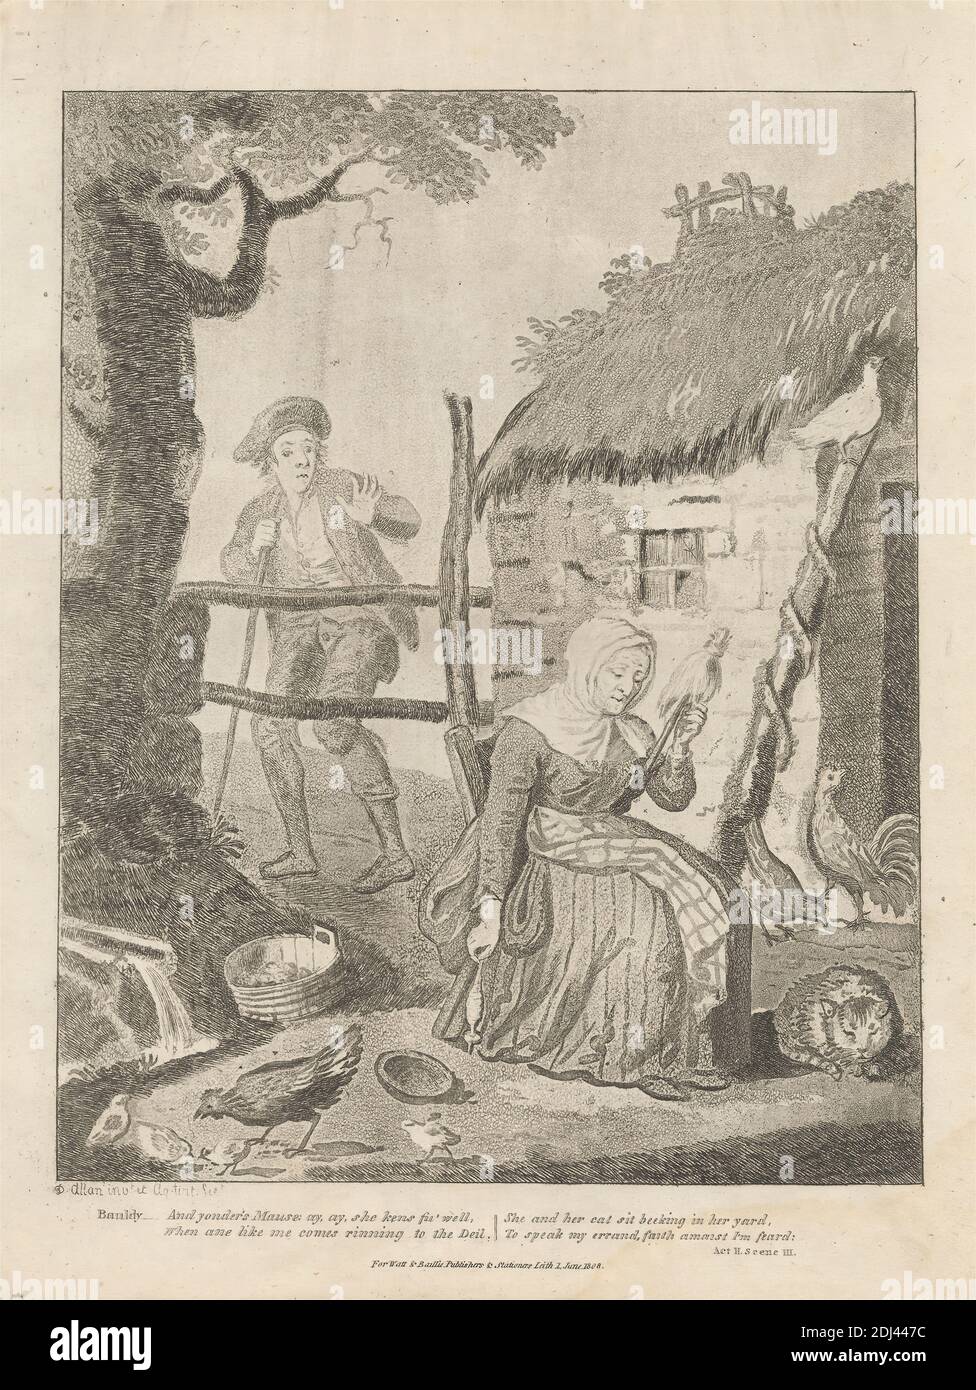 Bauldy and Mause, Print made by David Allan, 1744–1796, British, born in Scotland, after David Allan, 1744–1796, British, born in Scotland, Published by Watt & Baillie, active 1808, British, 1808, Etching and aquatint on moderately thick, slightly textured, cream wove paper, Sheet: 11 1/8 x 8 7/8 inches (28.3 x 22.5 cm), Plate: 10 9/16 x 8 1/16 inches (26.8 x 20.5 cm), and Image: 8 3/4 x 7 inches (22.2 x 17.8 cm), apron (main garment), bowl, breeches, cap, cat (domestic cat), chair, chickens, chicks, chimney, cottage, distaff, dress, farming, fence, genre subject, gesture, gutter (roadside Stock Photo